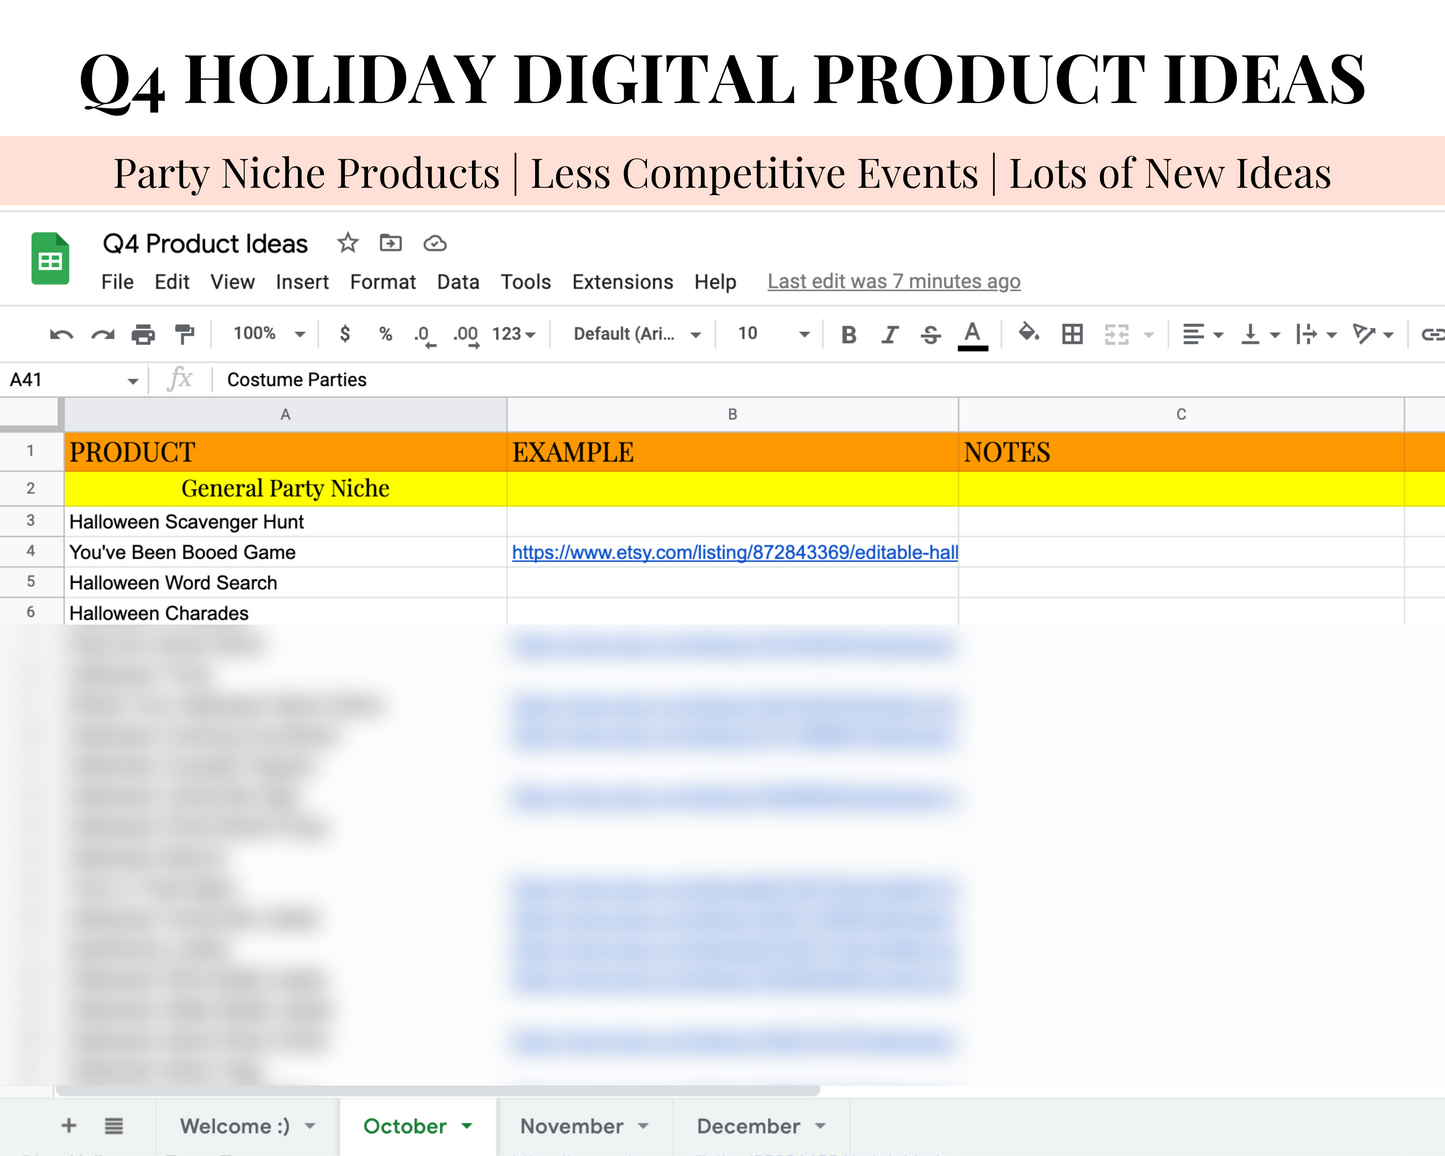 Q4 Holiday Product Ideas